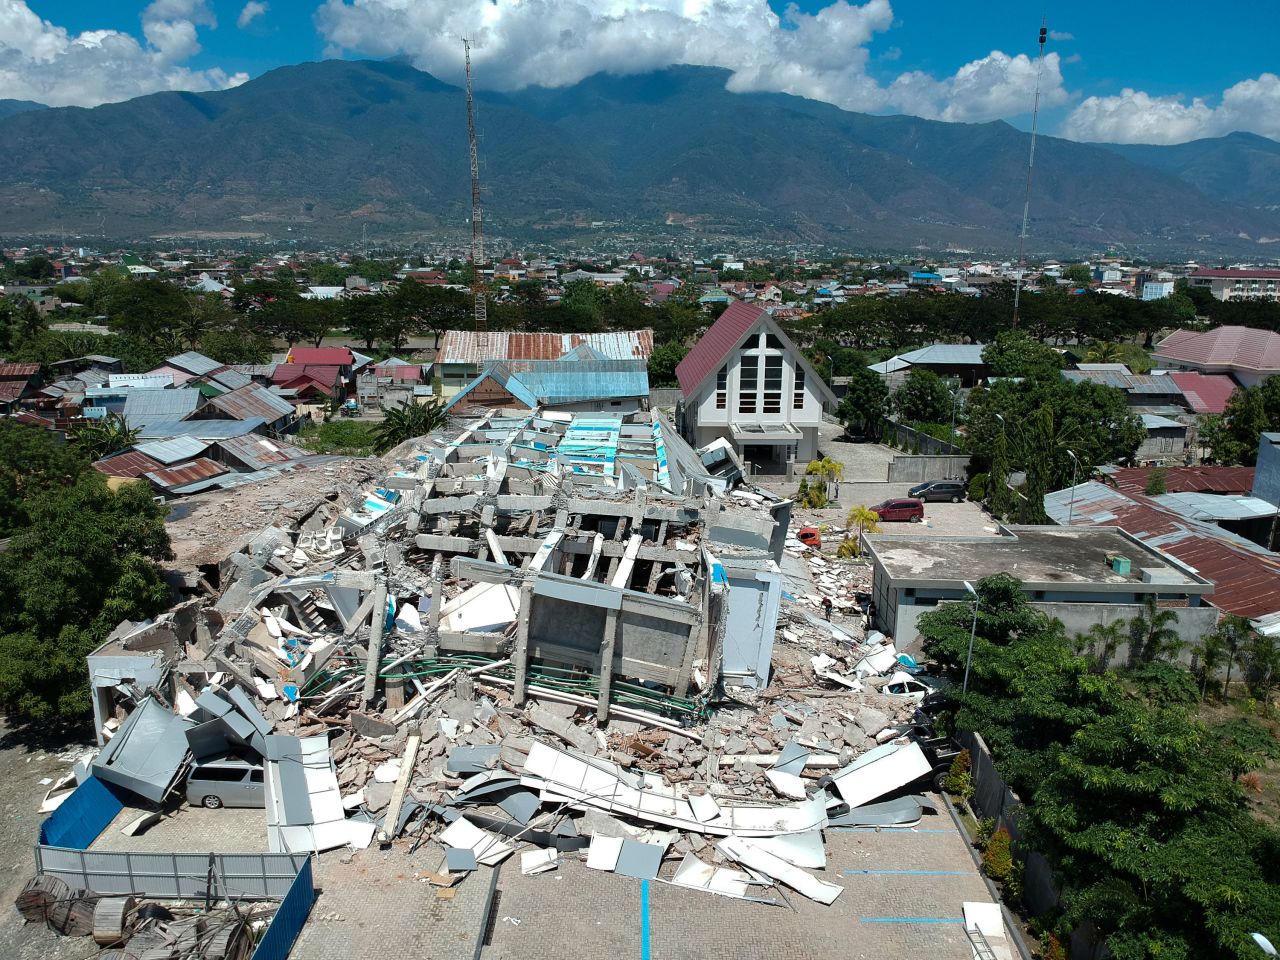 The remains of a Palu building after it collapsed following the earthquake.